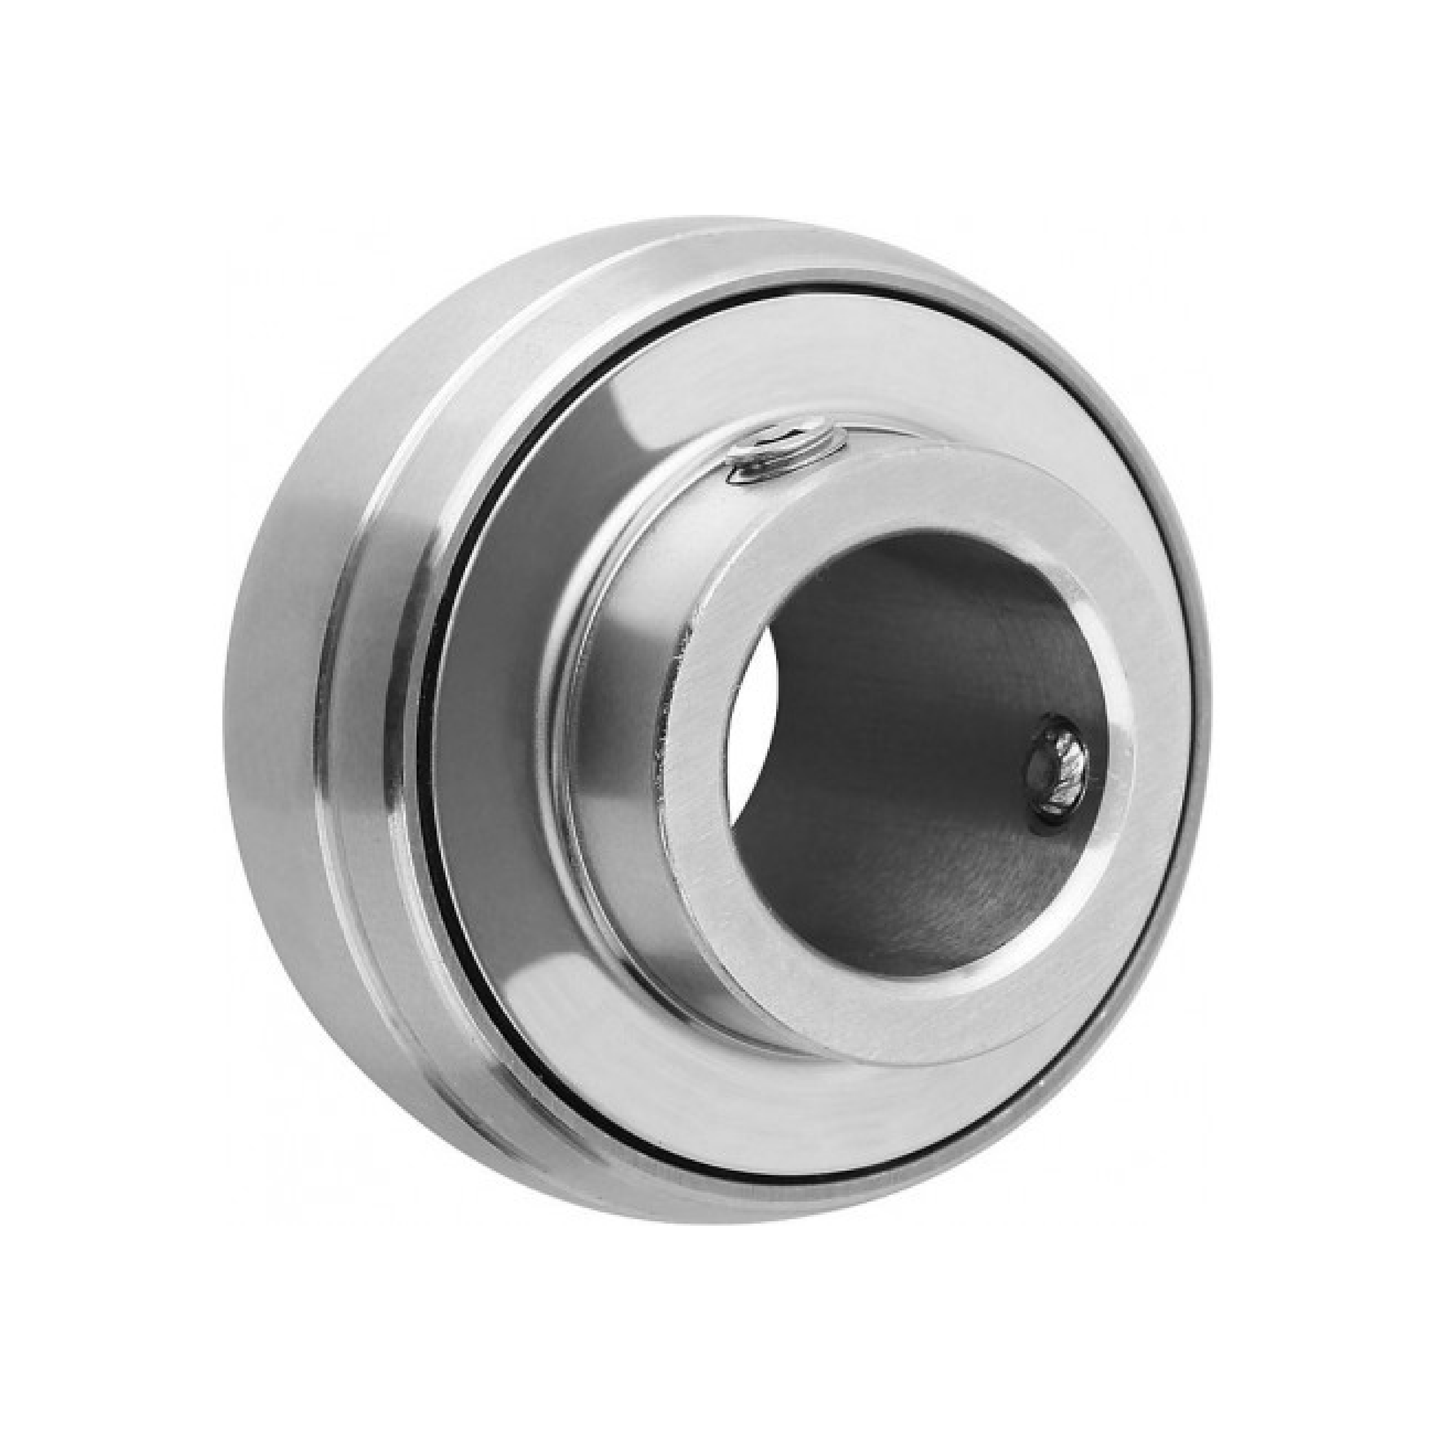 Bearing with locking ring 20x47x31 UC 204 stainless steel